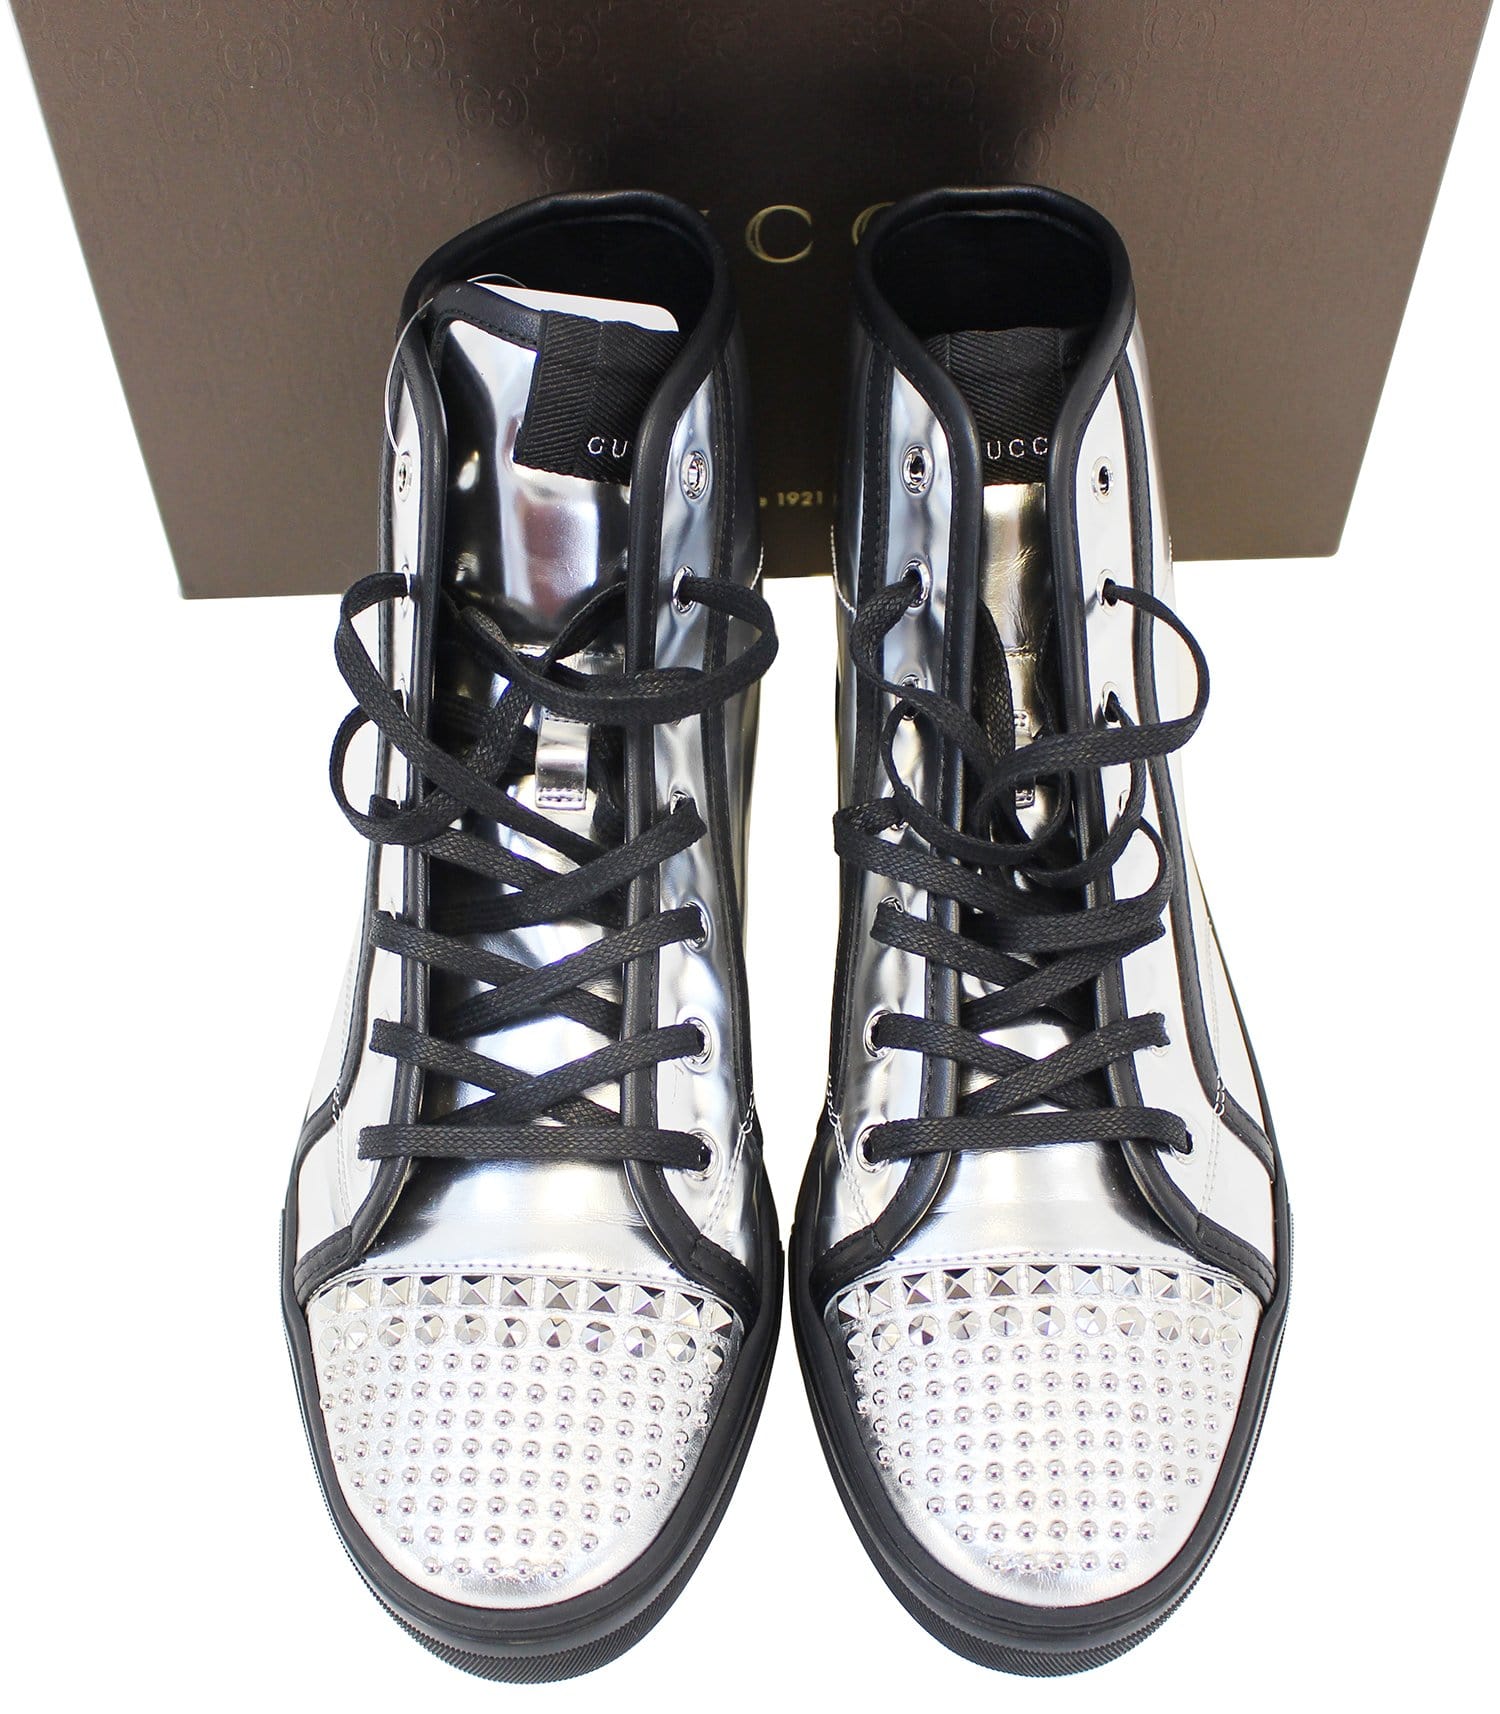 Shoes, Louis Vuitton Spiked Sneakers Size 11